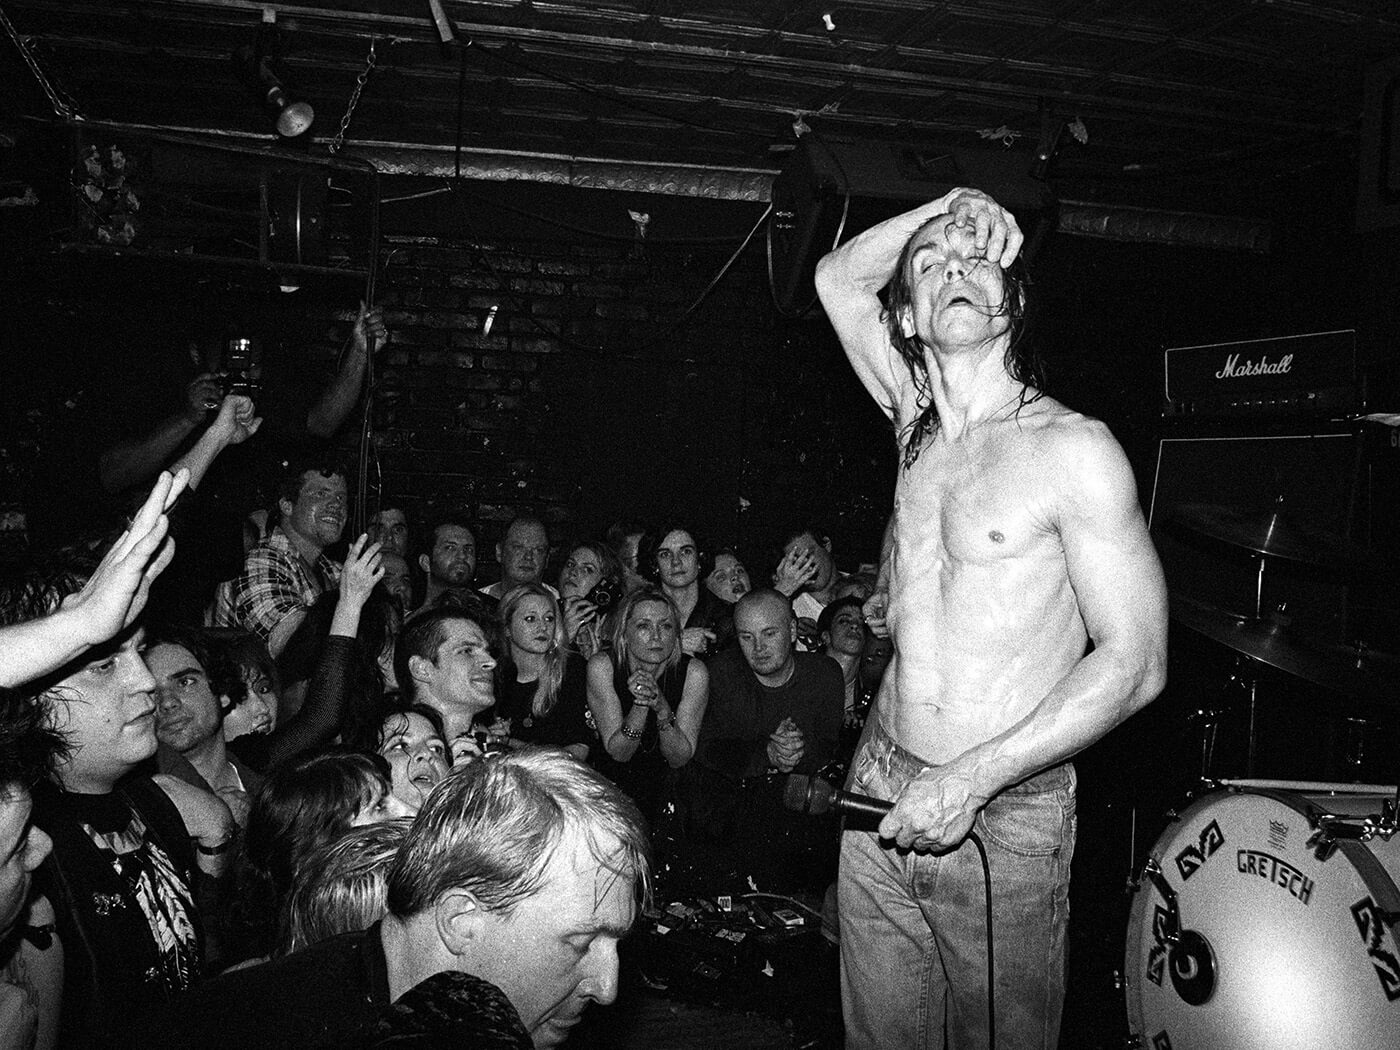 Iggy Pop performs at the Continental Divide in January 1993 in New York City